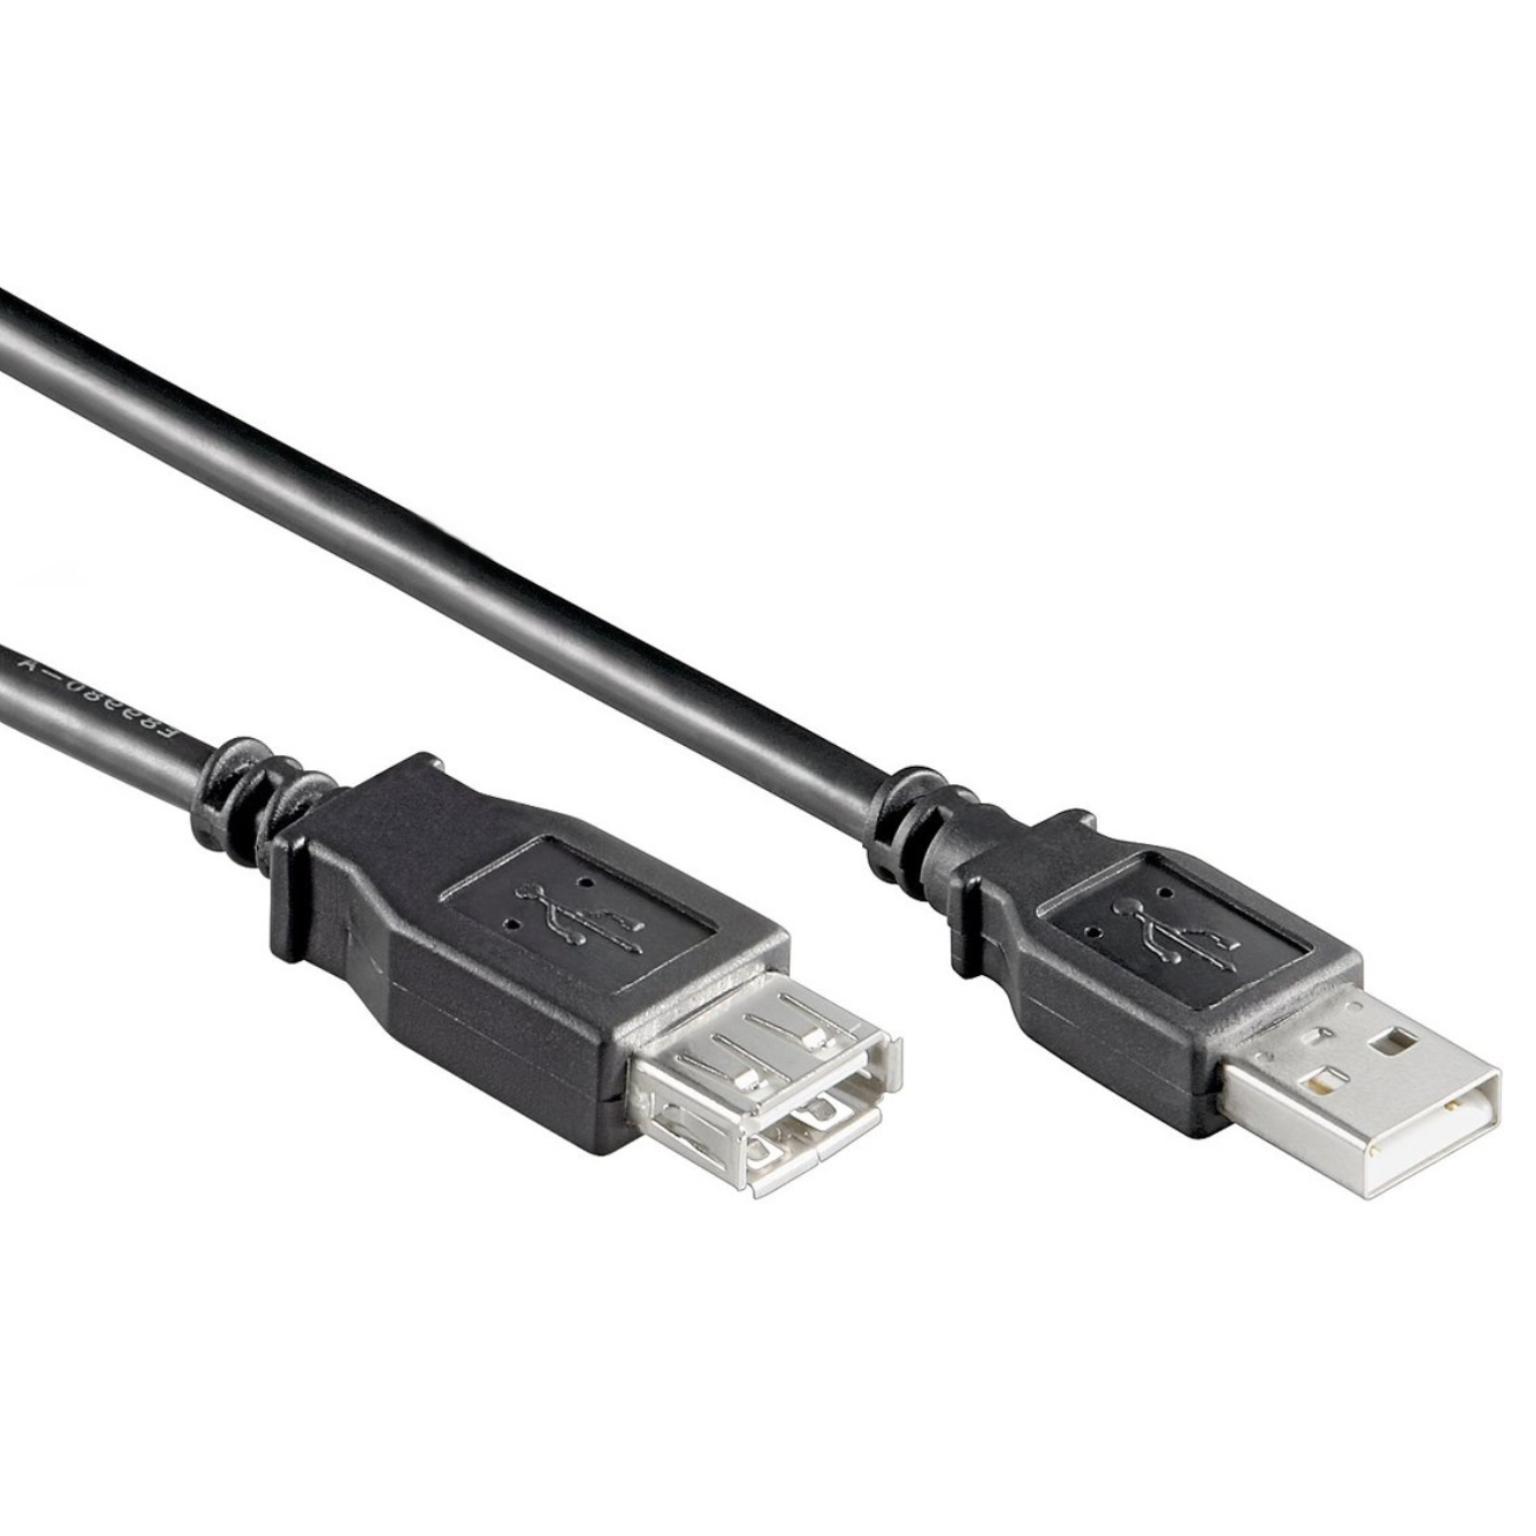 CABLE USB2.0 40 CM تطويلة, Cable